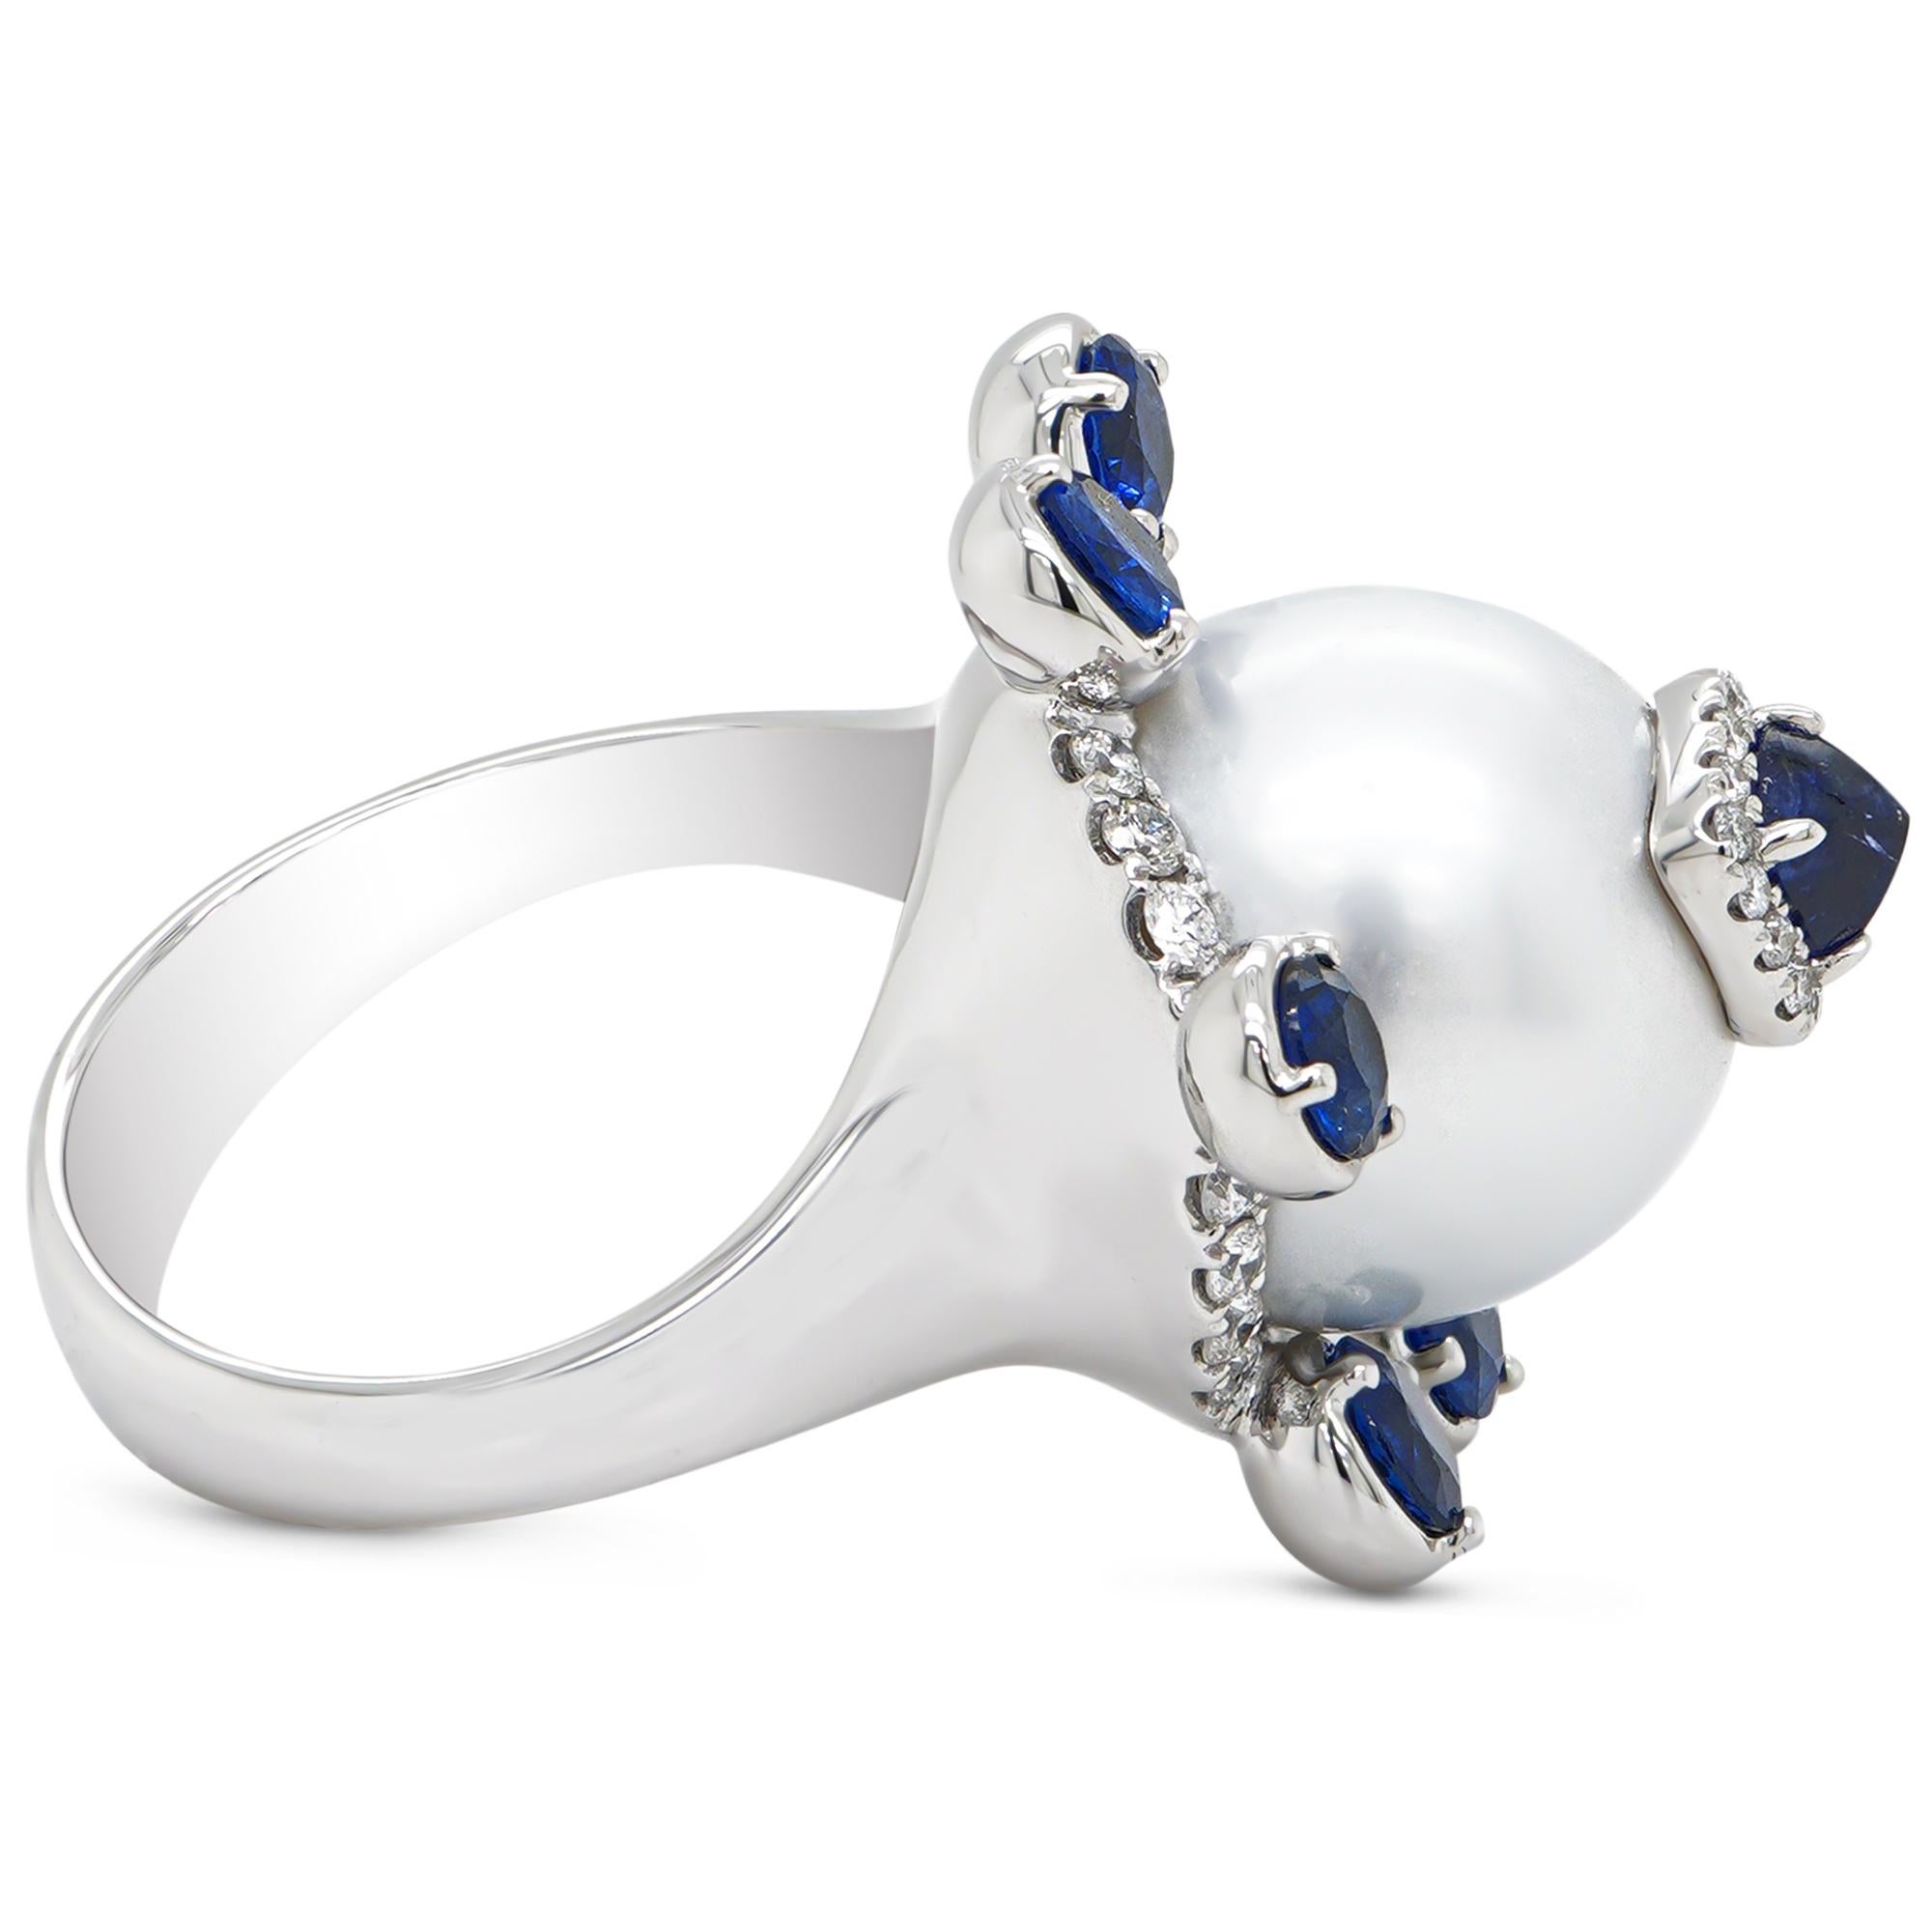 Possible only with meticuolous hand craft skill, this ring has been hand crafted in Hong Kong with utmost precision. A 13.40 mm south sea pearl is crowned with a sugar loaf no heat sapphire and accented with whiite diamonds on the side. The ring is